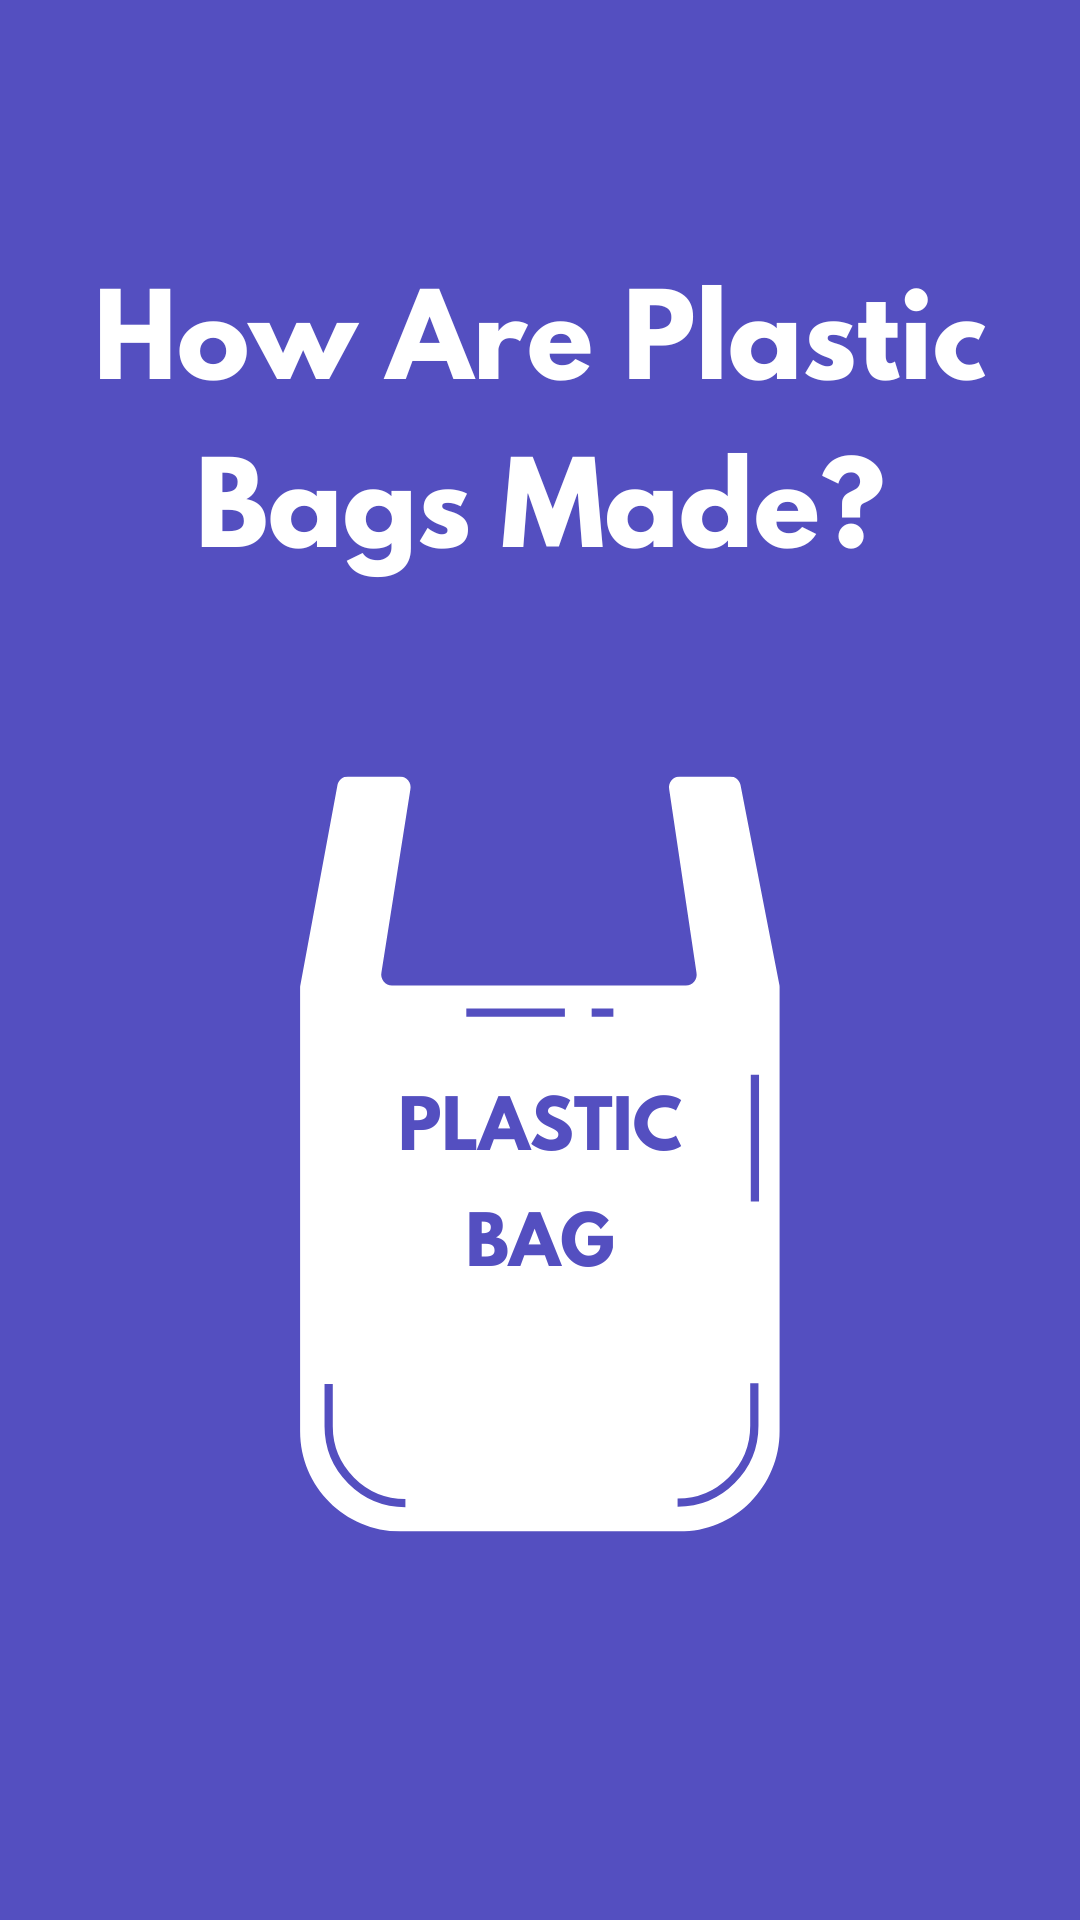 image for how are plastic bags made blog post